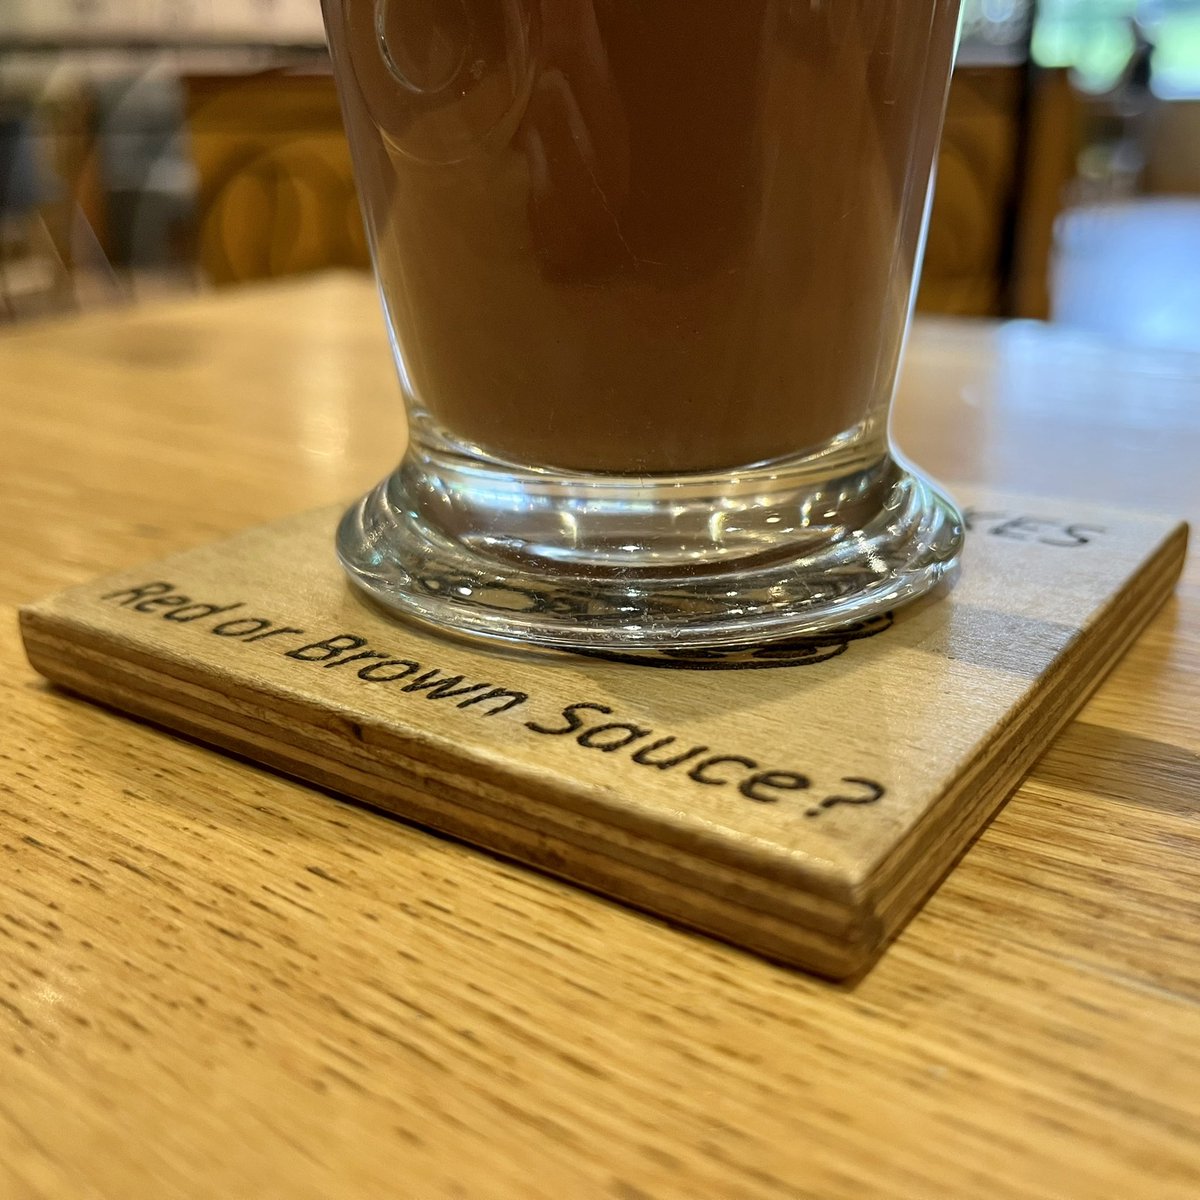 🔴🟤Who likes oatcakes & is it red or brown sauce? Check out our NEW coasters celebrating #stokeontrent’s famous sayings & products. All co-created from #recycled material & made socially by #volunteers from our #community activities. See our eBay shop: ebay.co.uk/itm/1656937068…